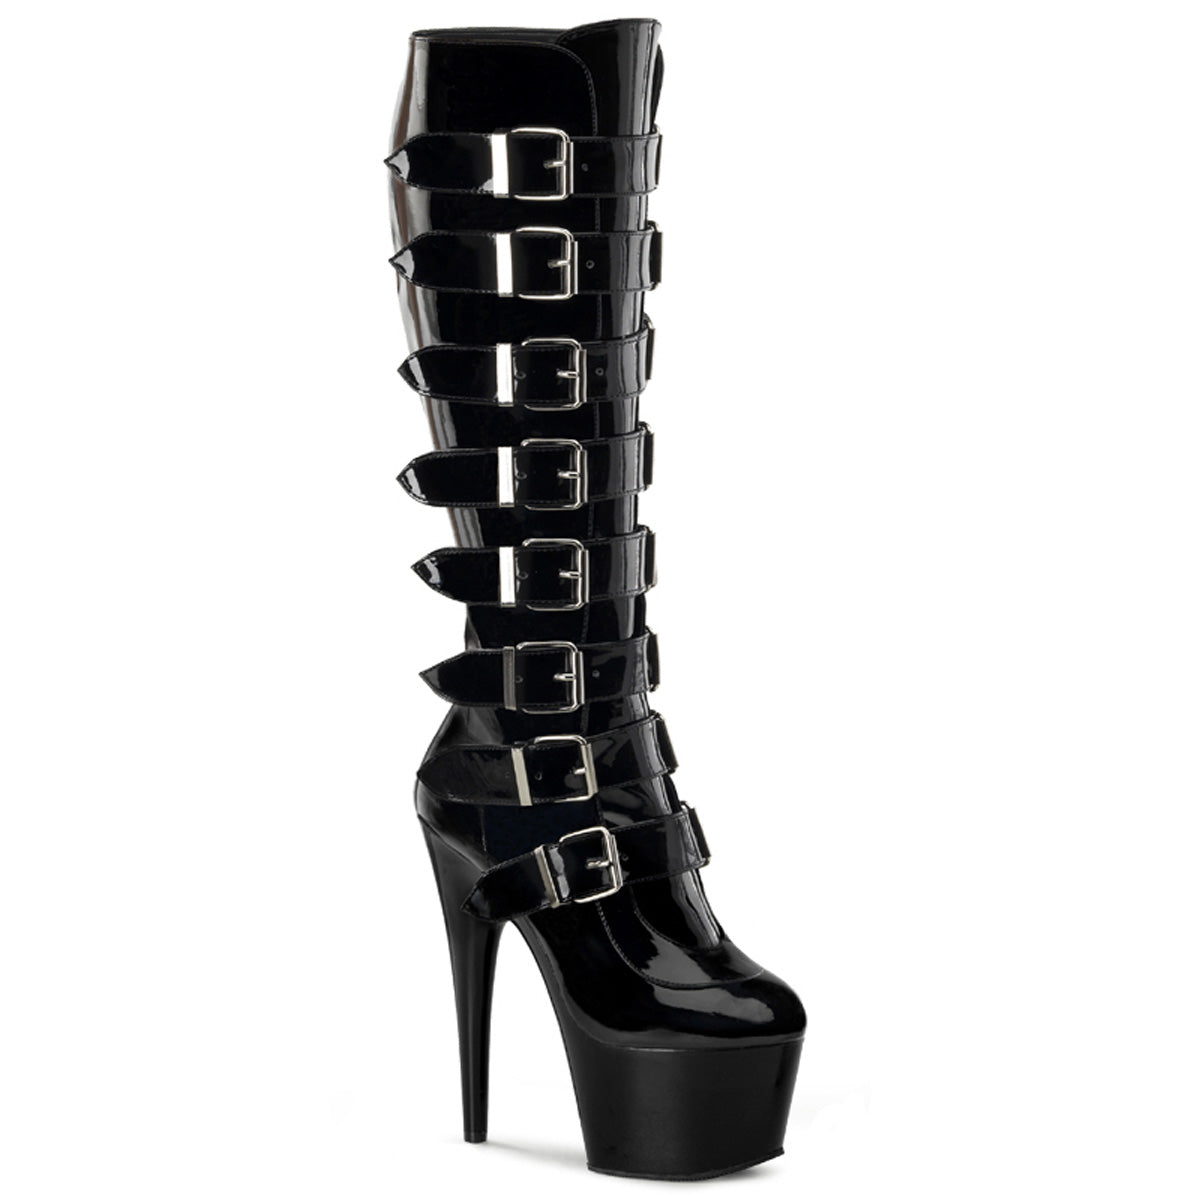 ADORE-2043 Black Knee High Boots